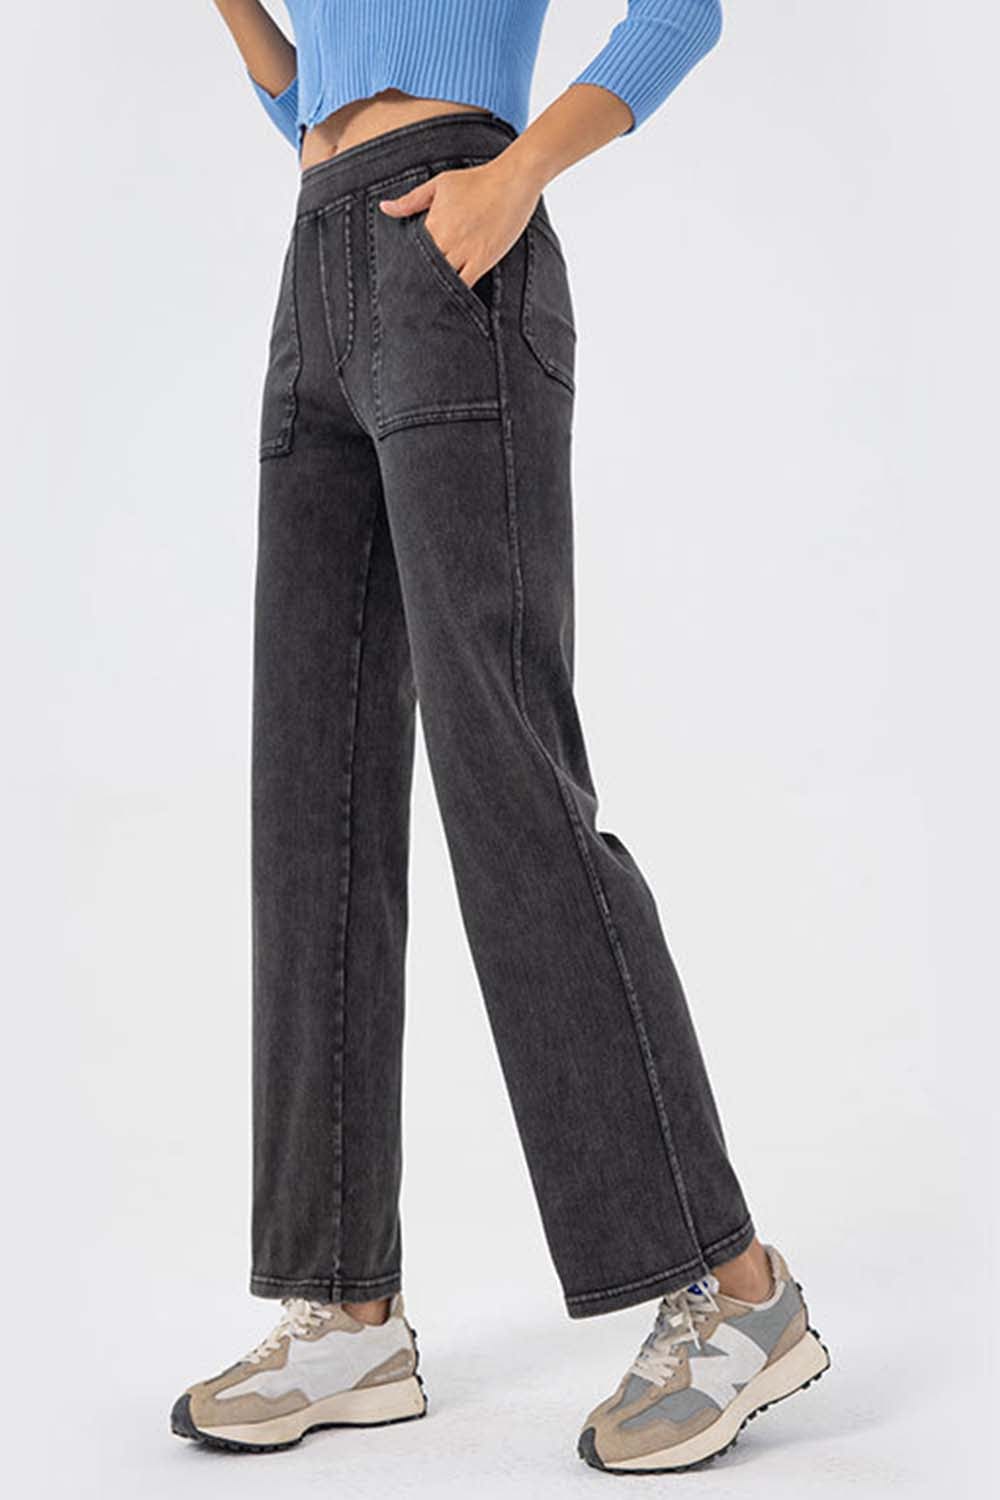 Trendsi Jeans Heather Gray / S Pocketed Long Jeans